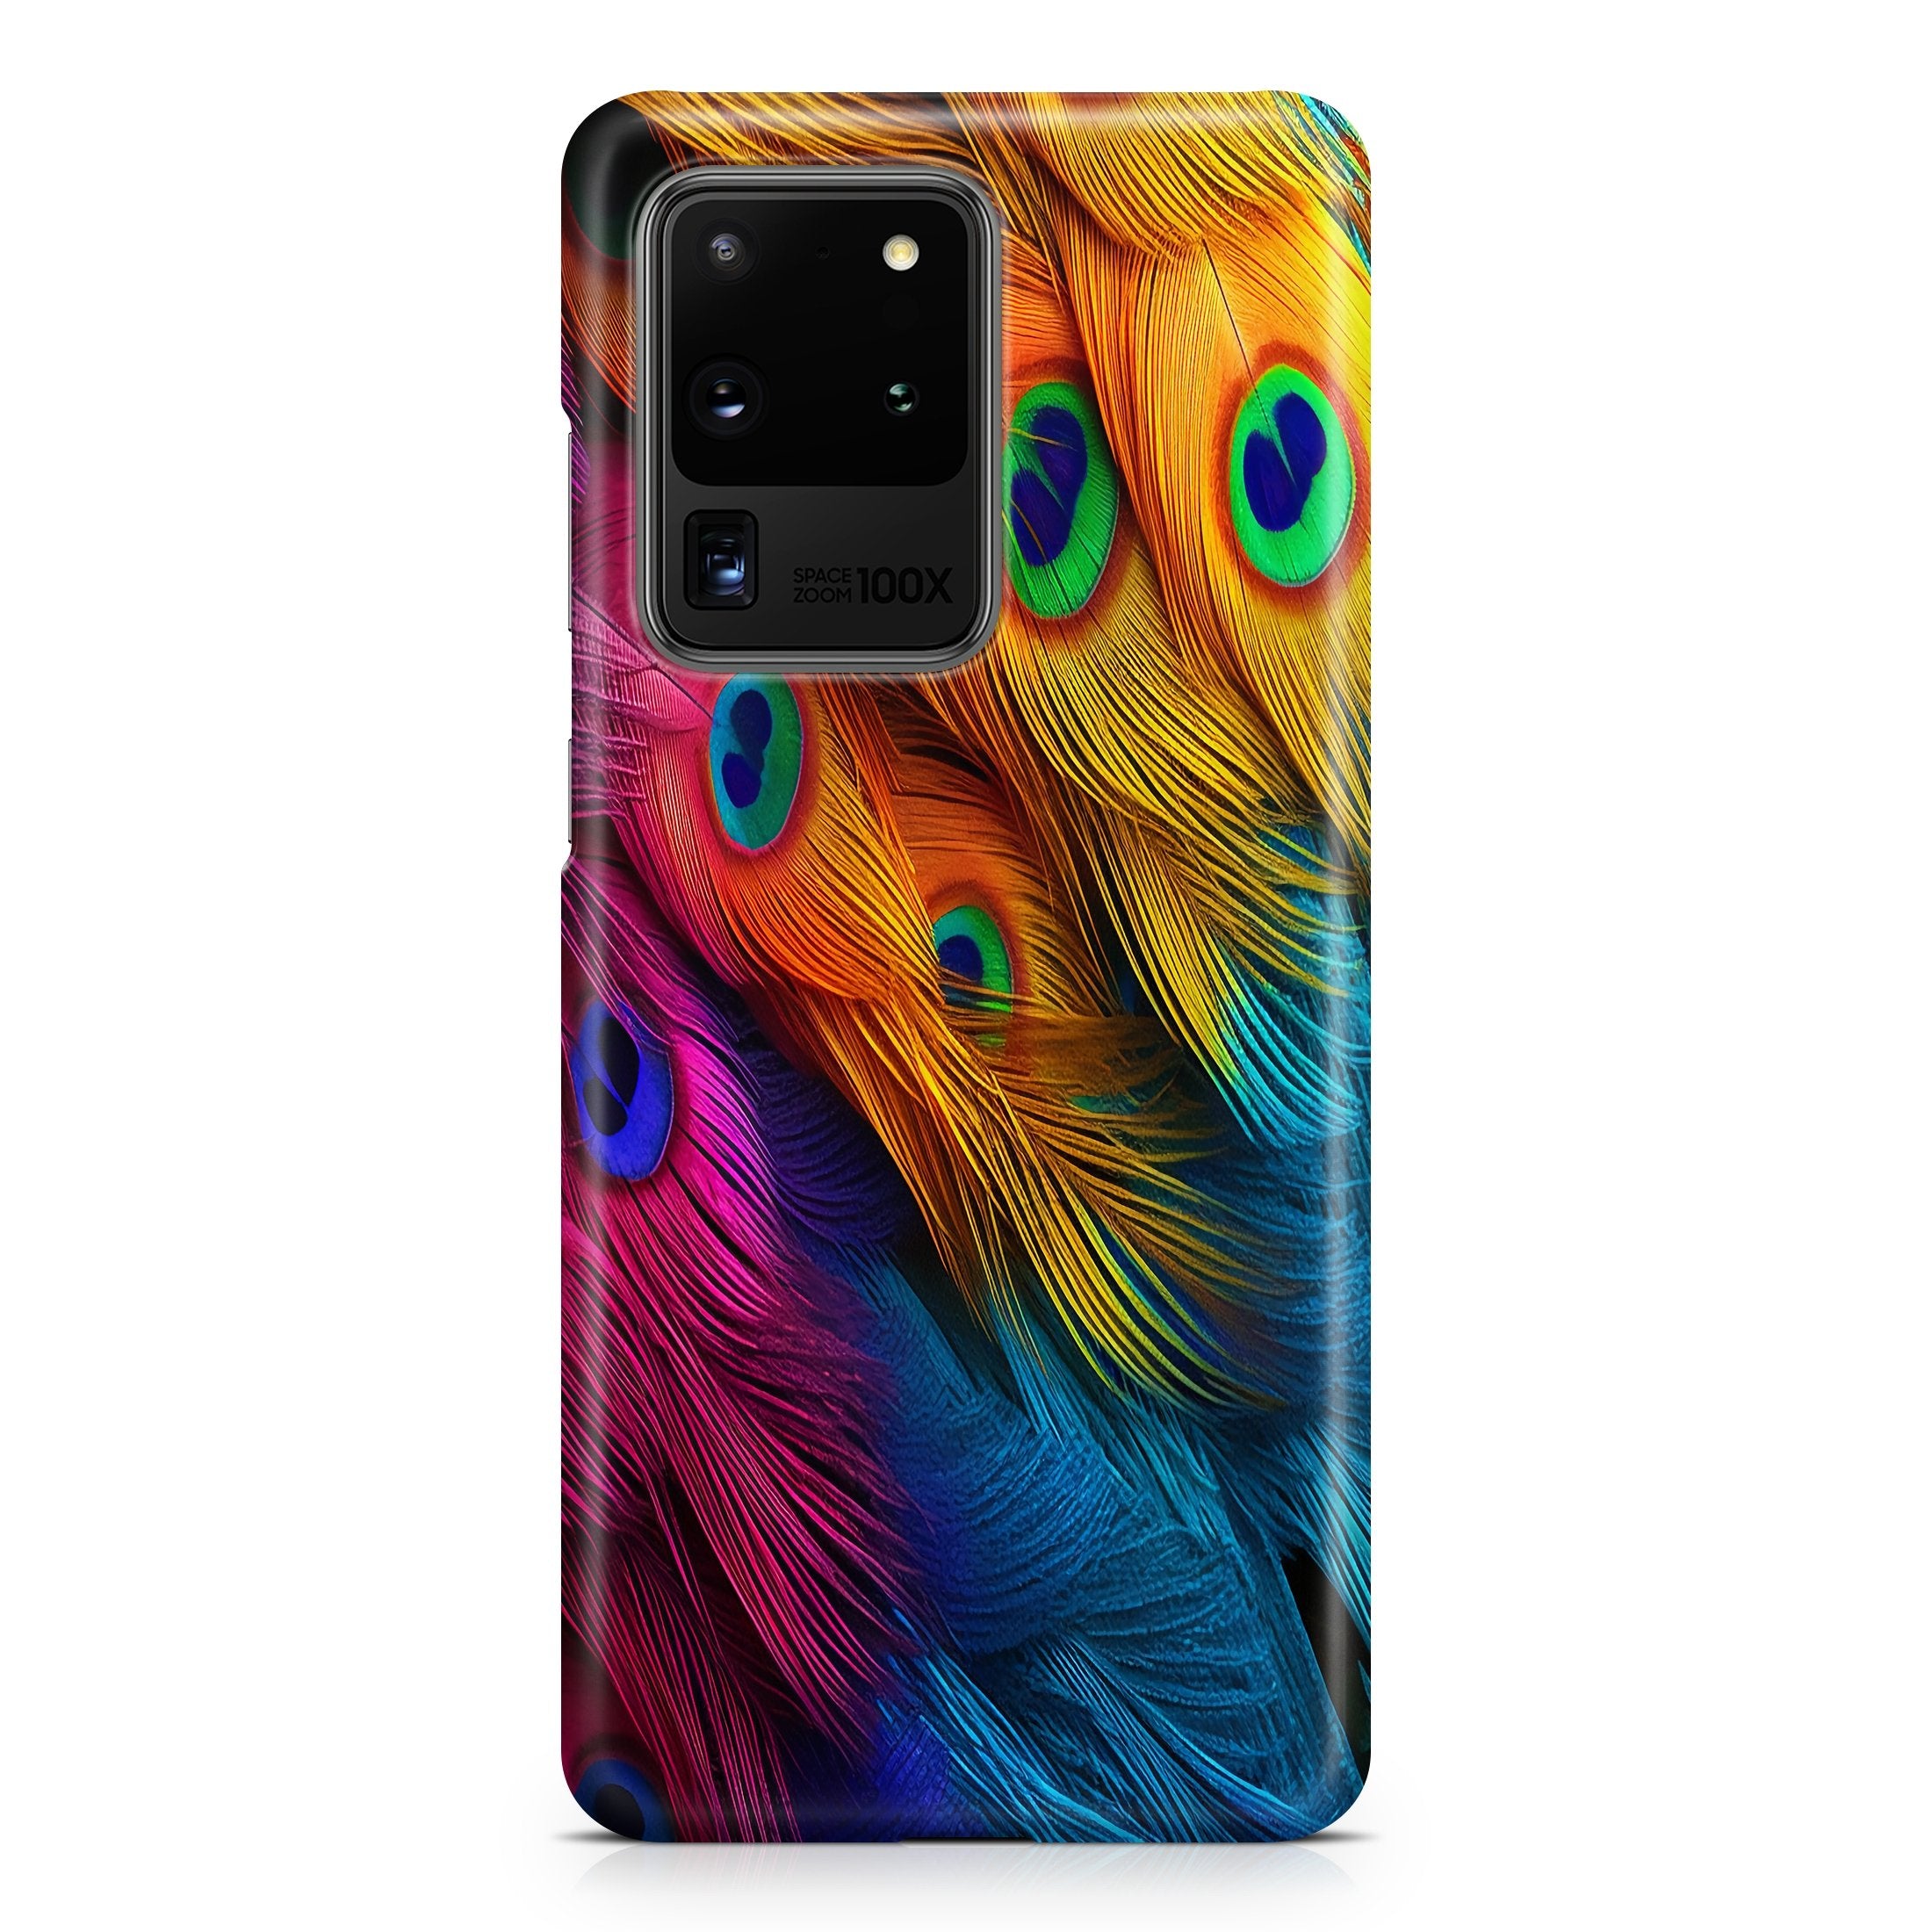 Complex Peacock - Samsung phone case designs by CaseSwagger